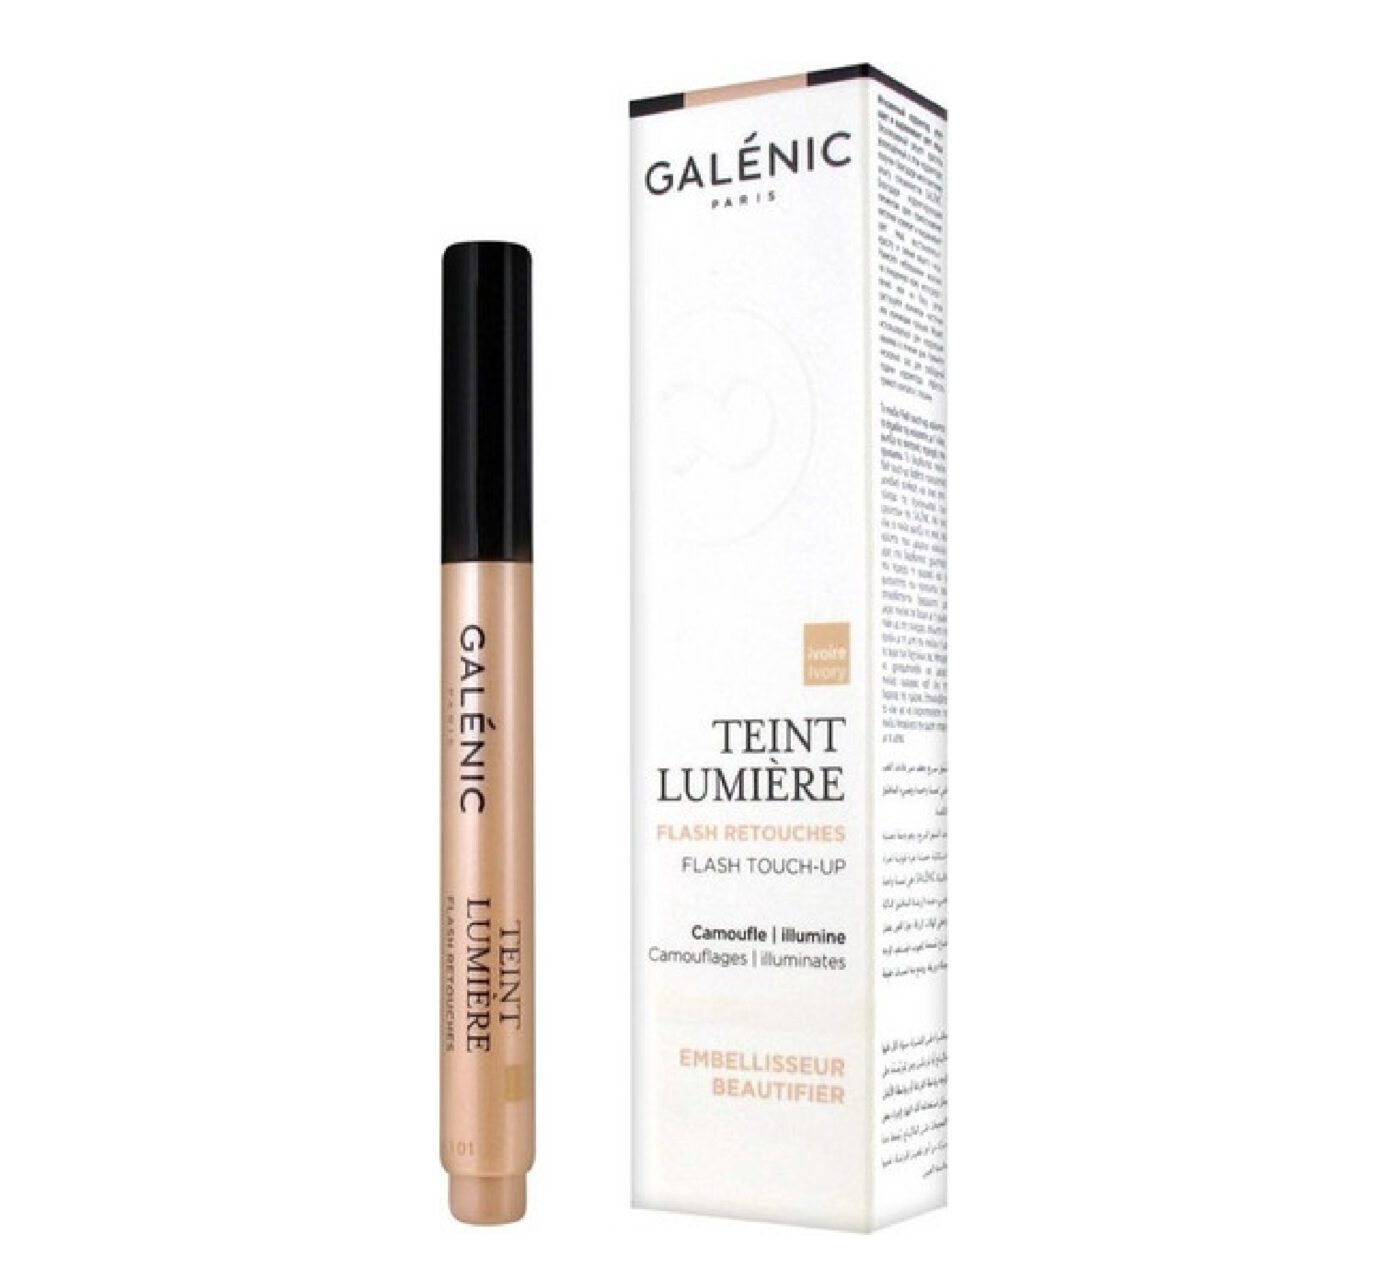 Galenic Teint Lumiere Flash Touch Up